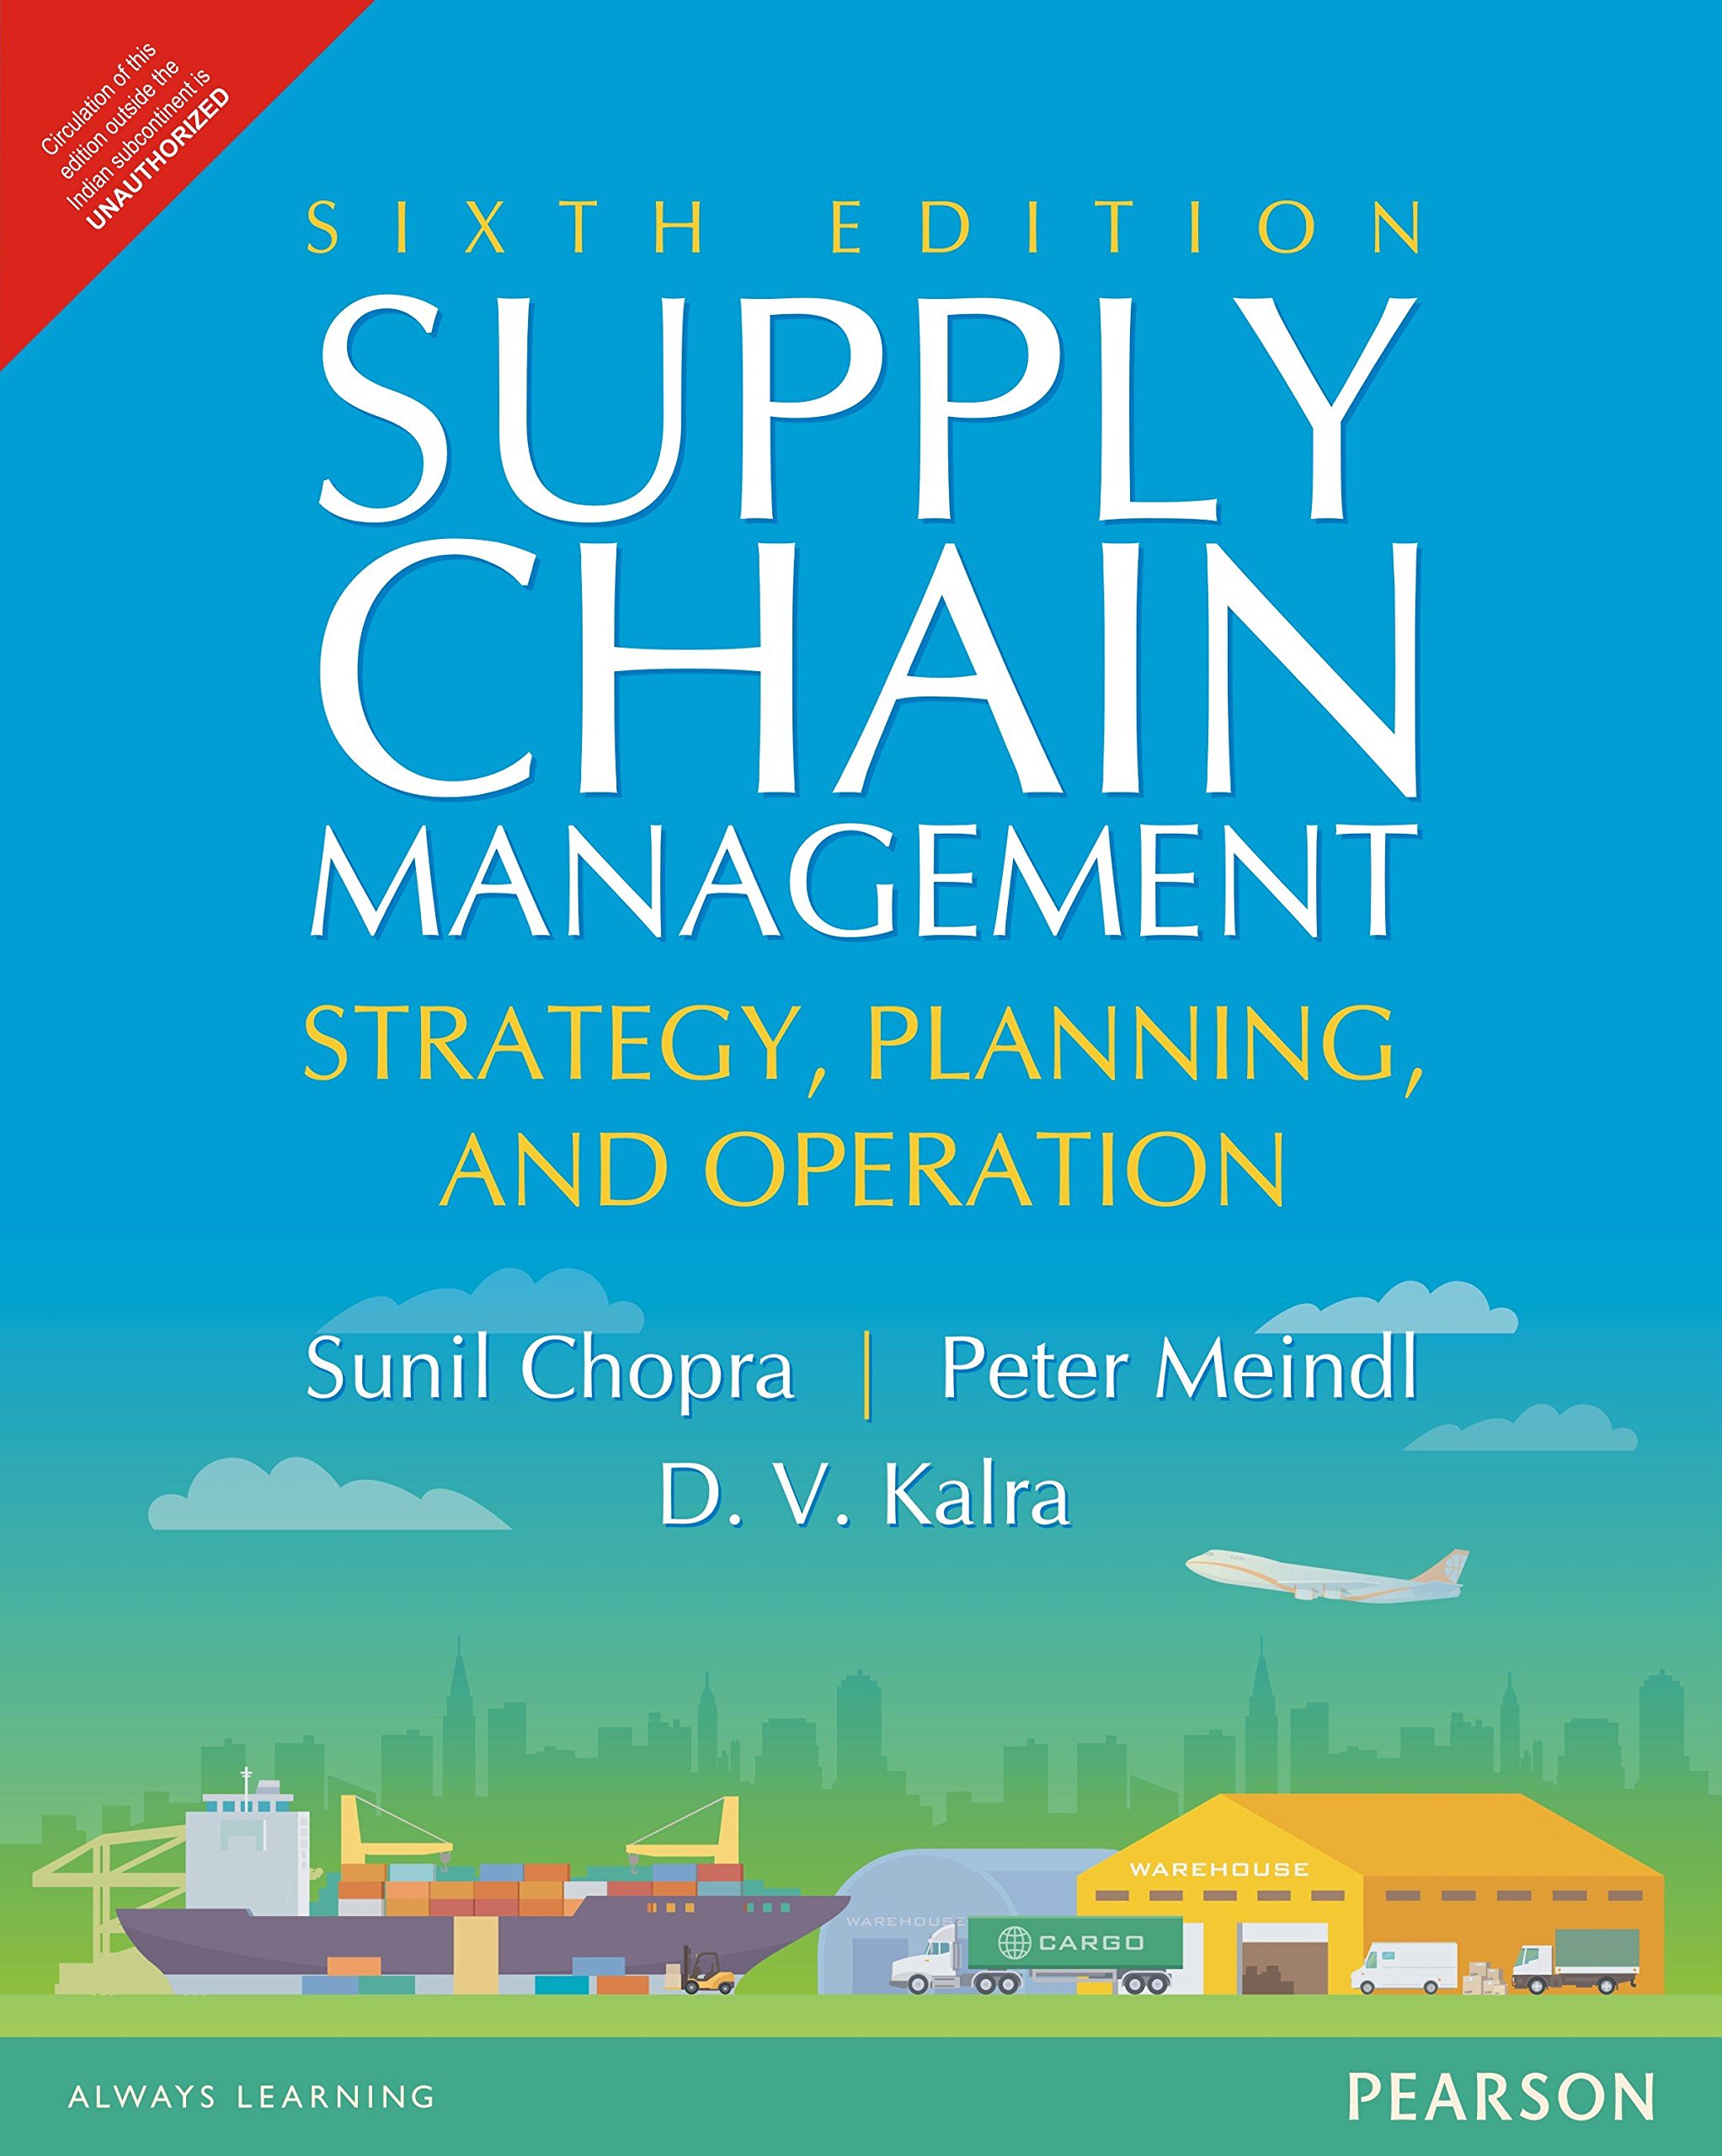 SUPPLY CHAIN MANAGEMENT, 6TH EDITION